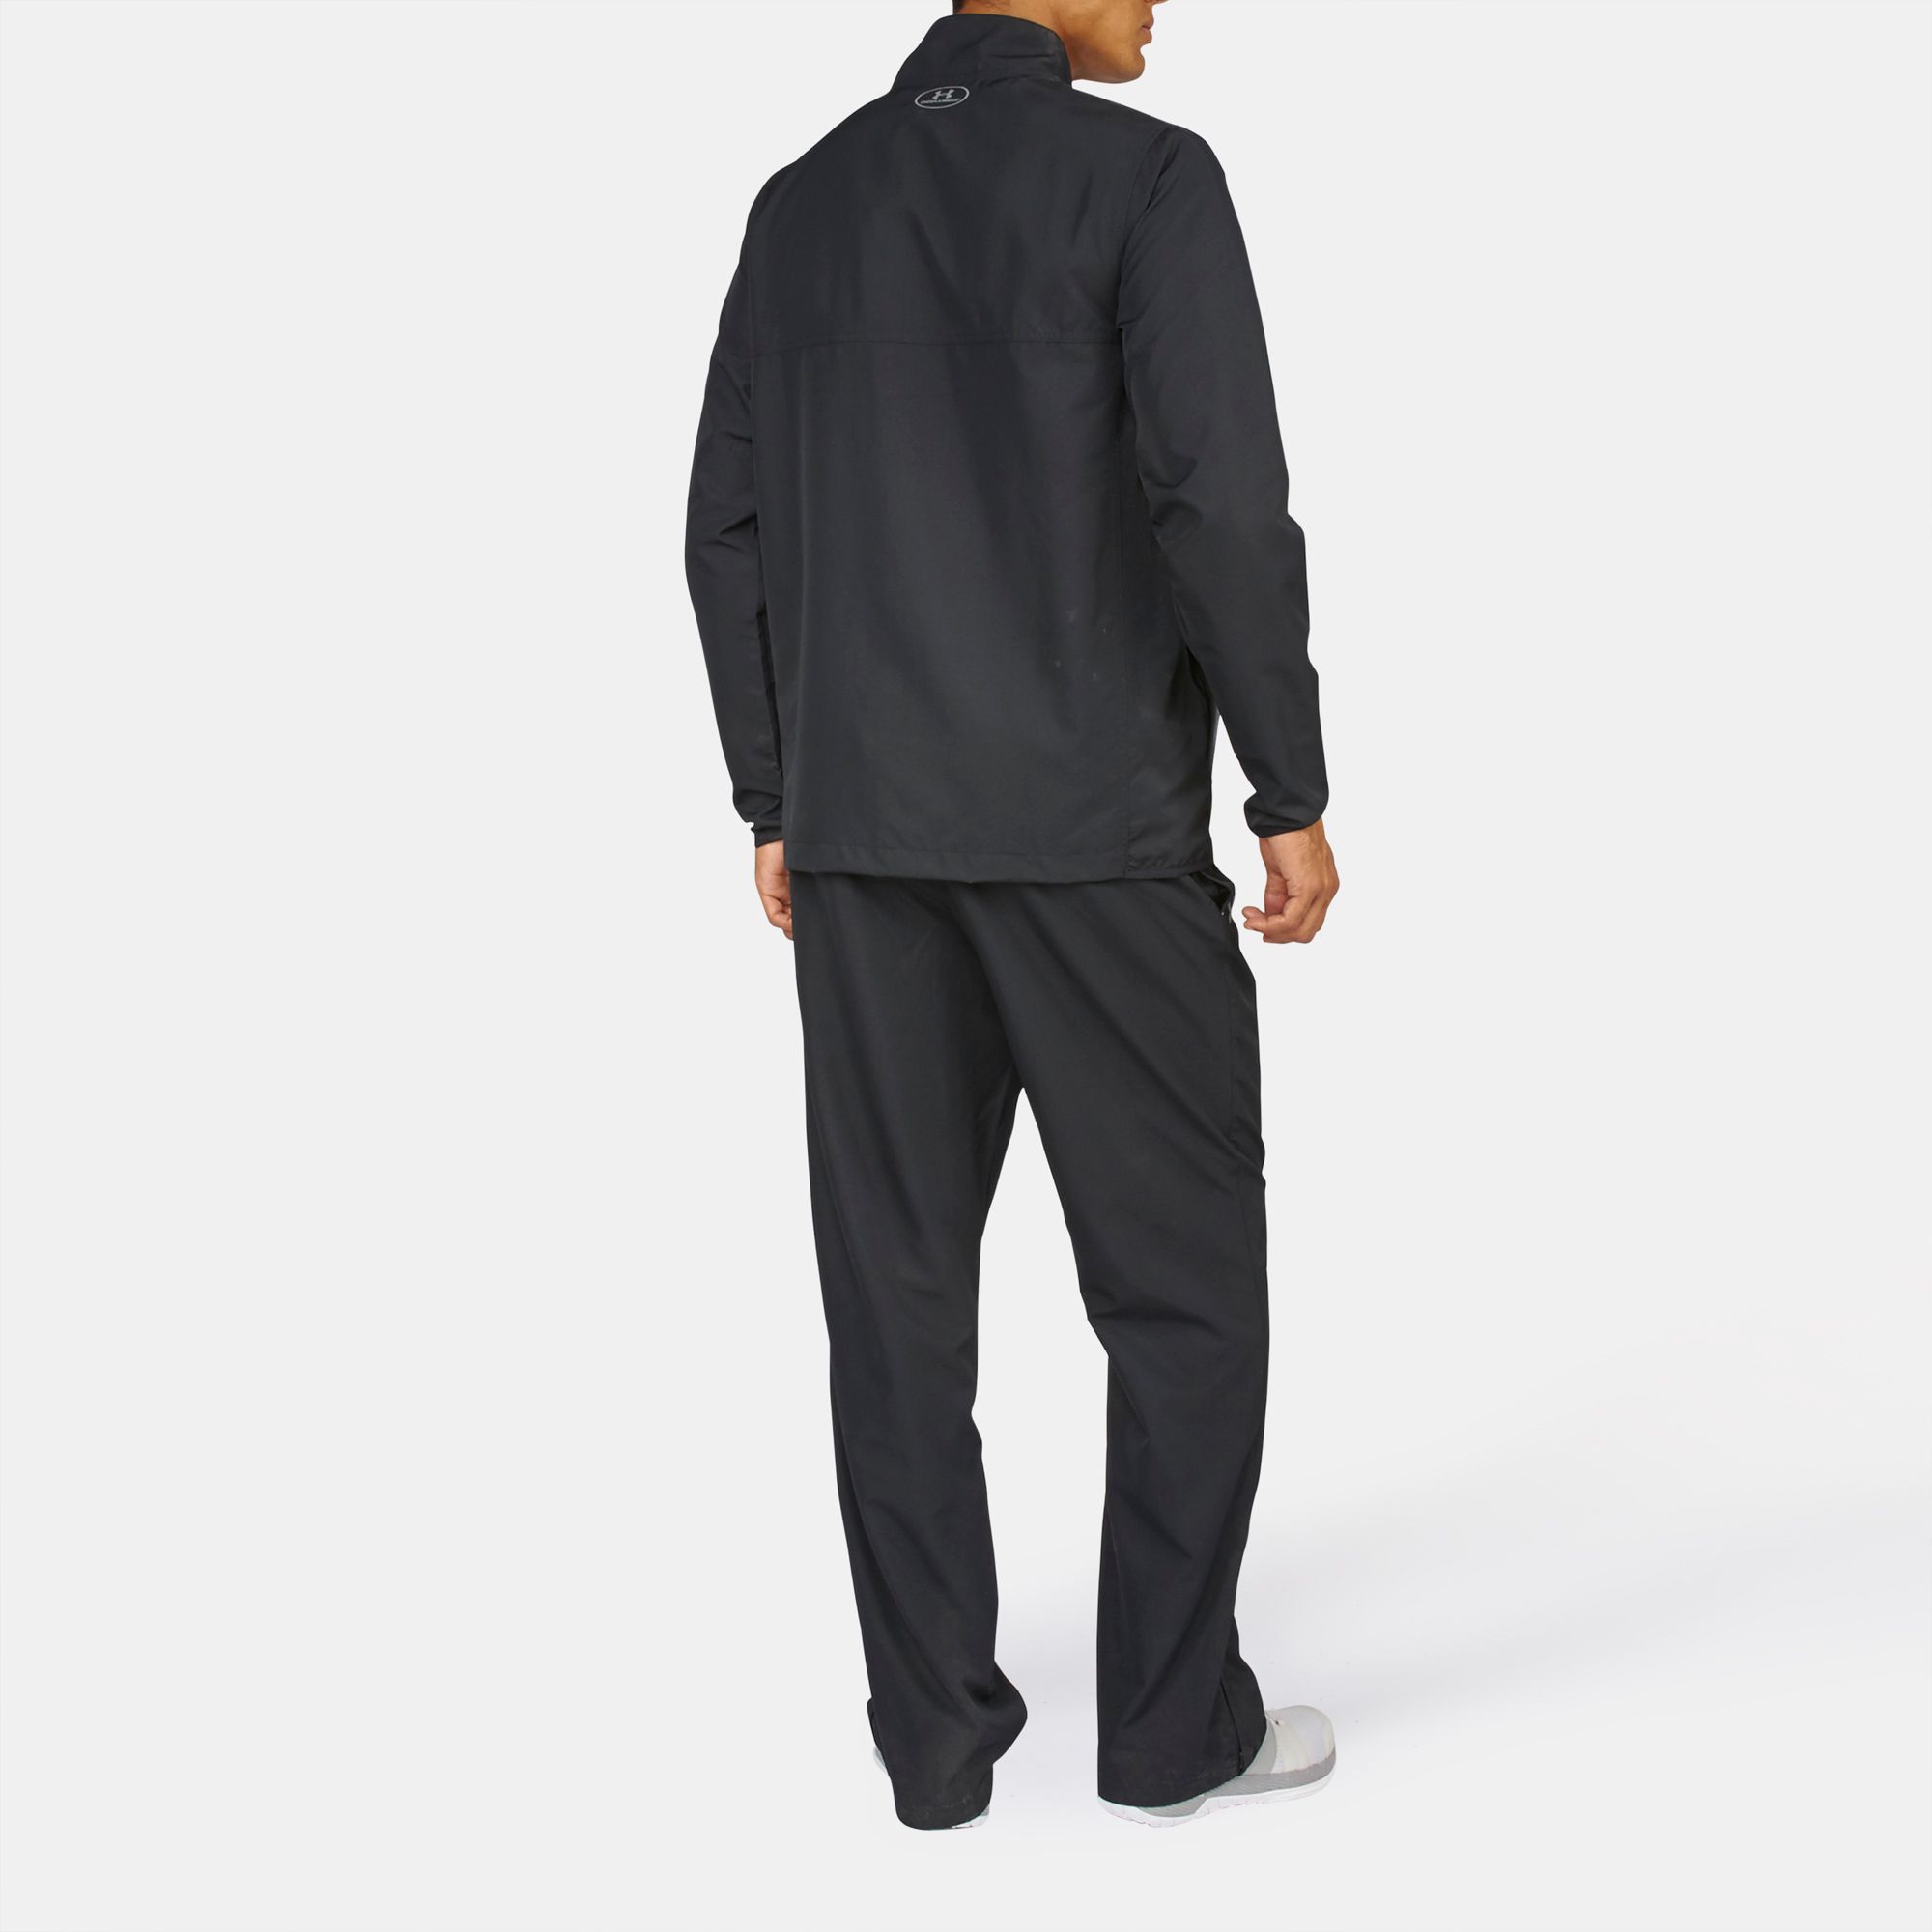 Shop Black Under Armour Vital Warm-Up Suit for Mens by Under Armour | SSS